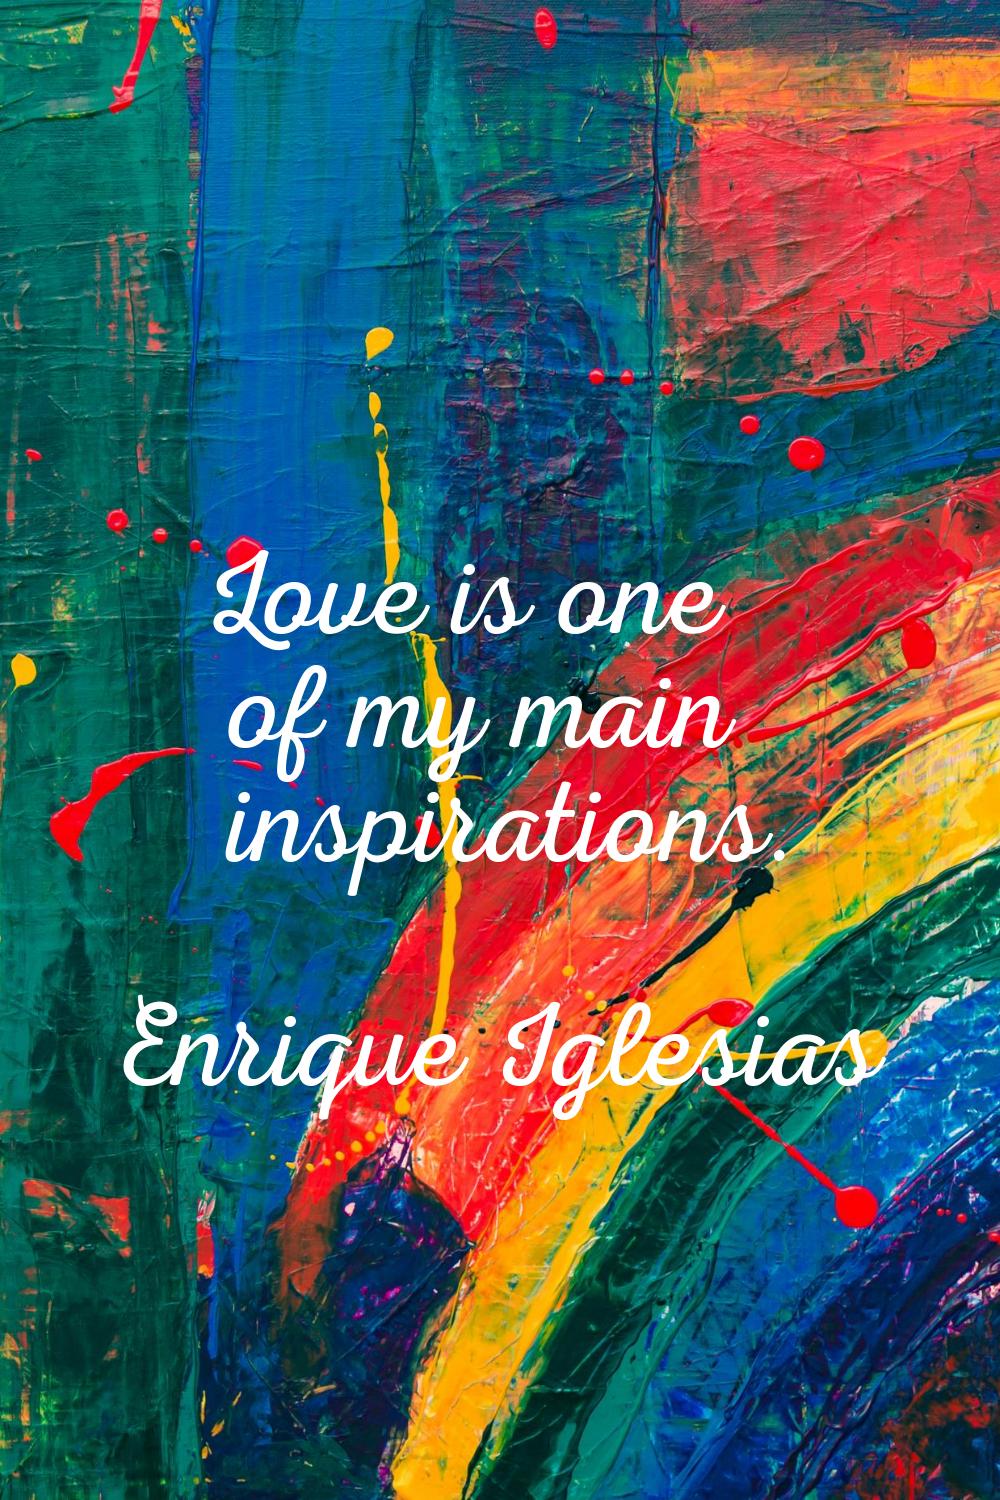 Love is one of my main inspirations.